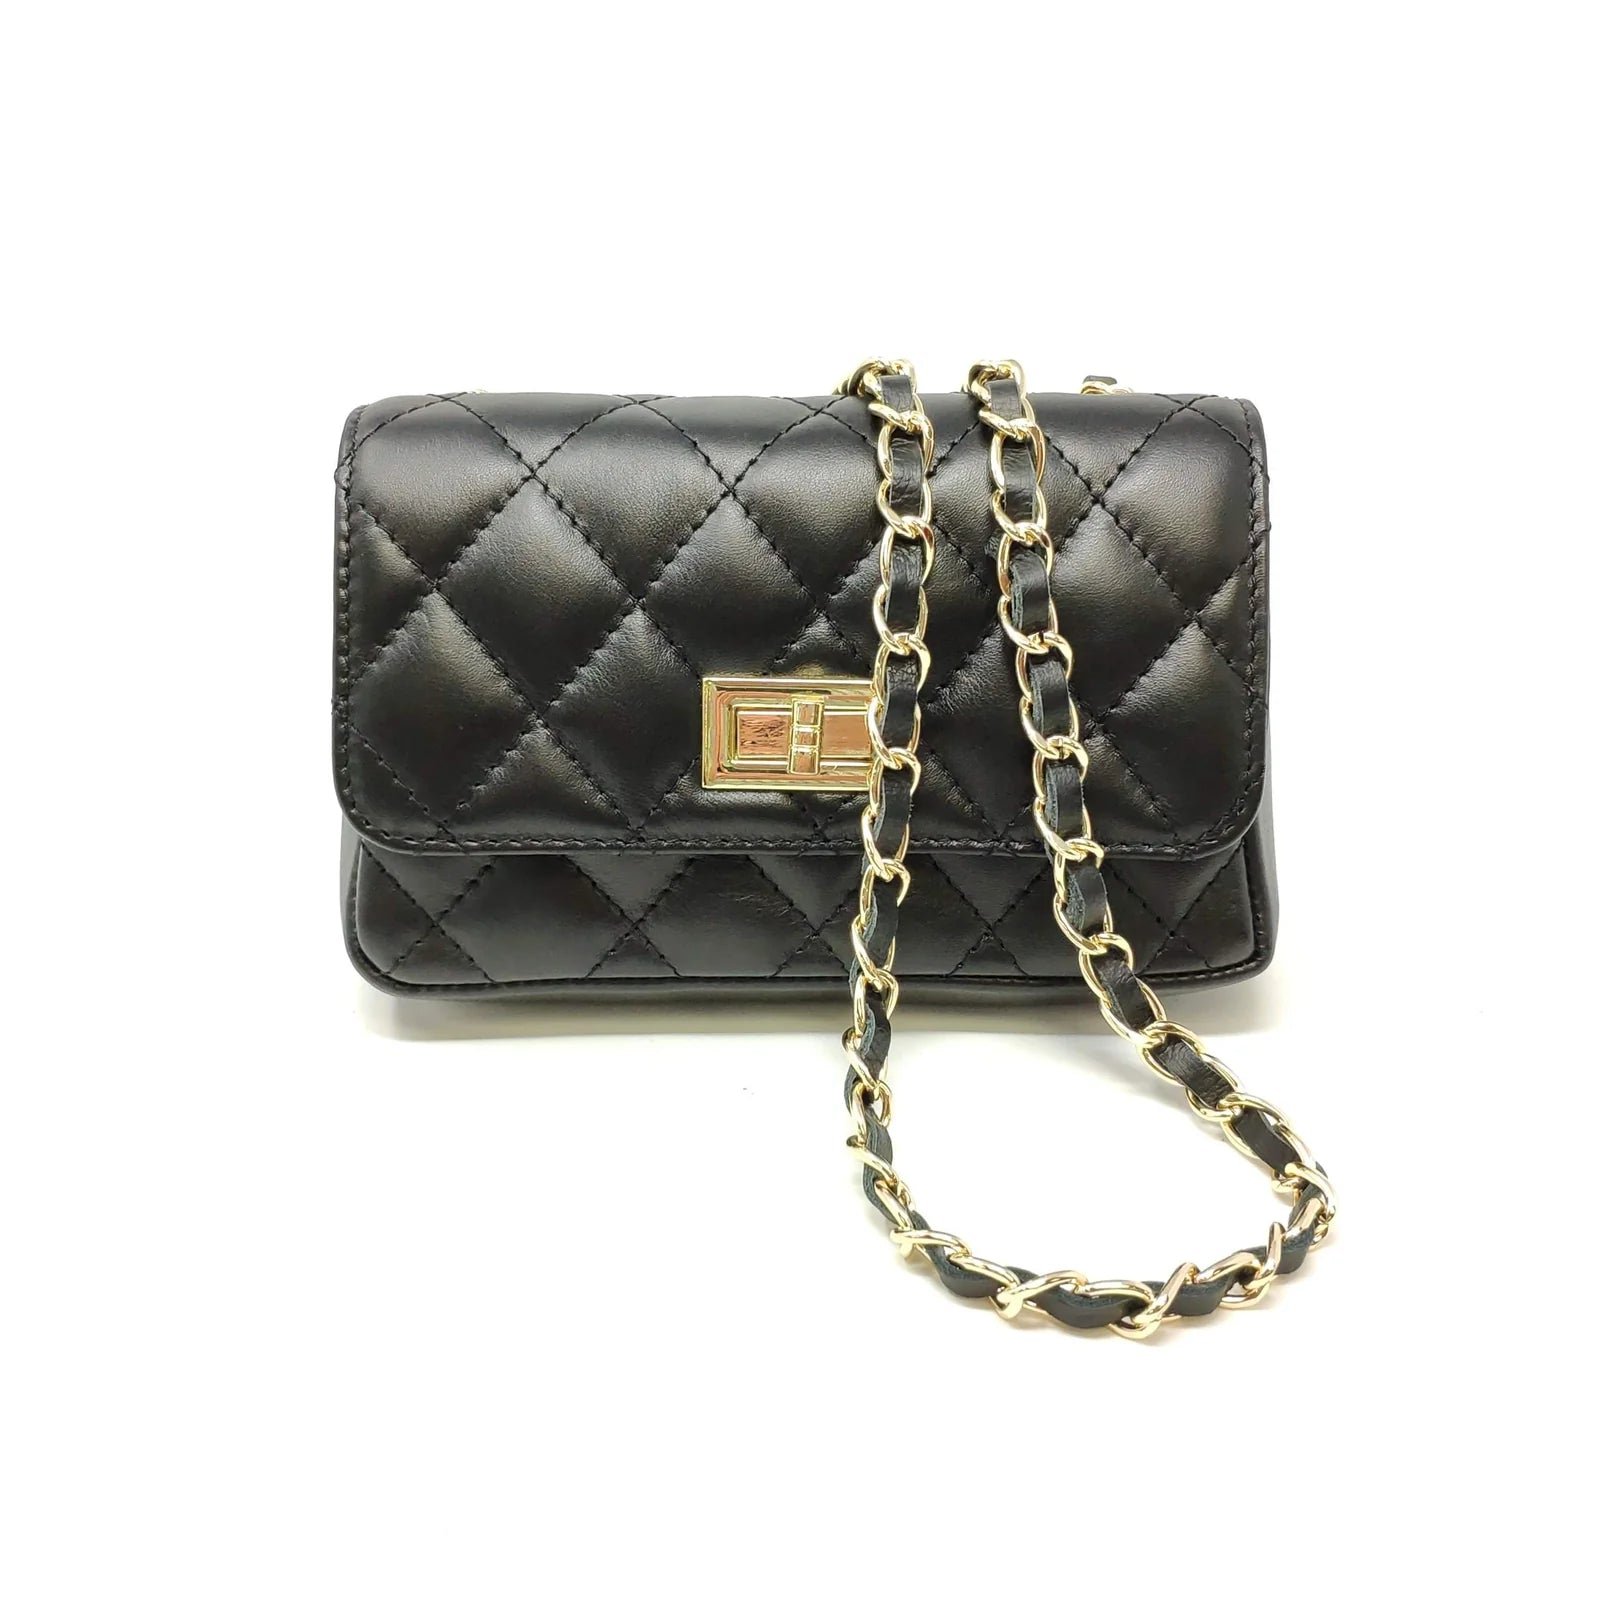 Quilted Small Leather Bag in Black color. At Kadou Boutique.